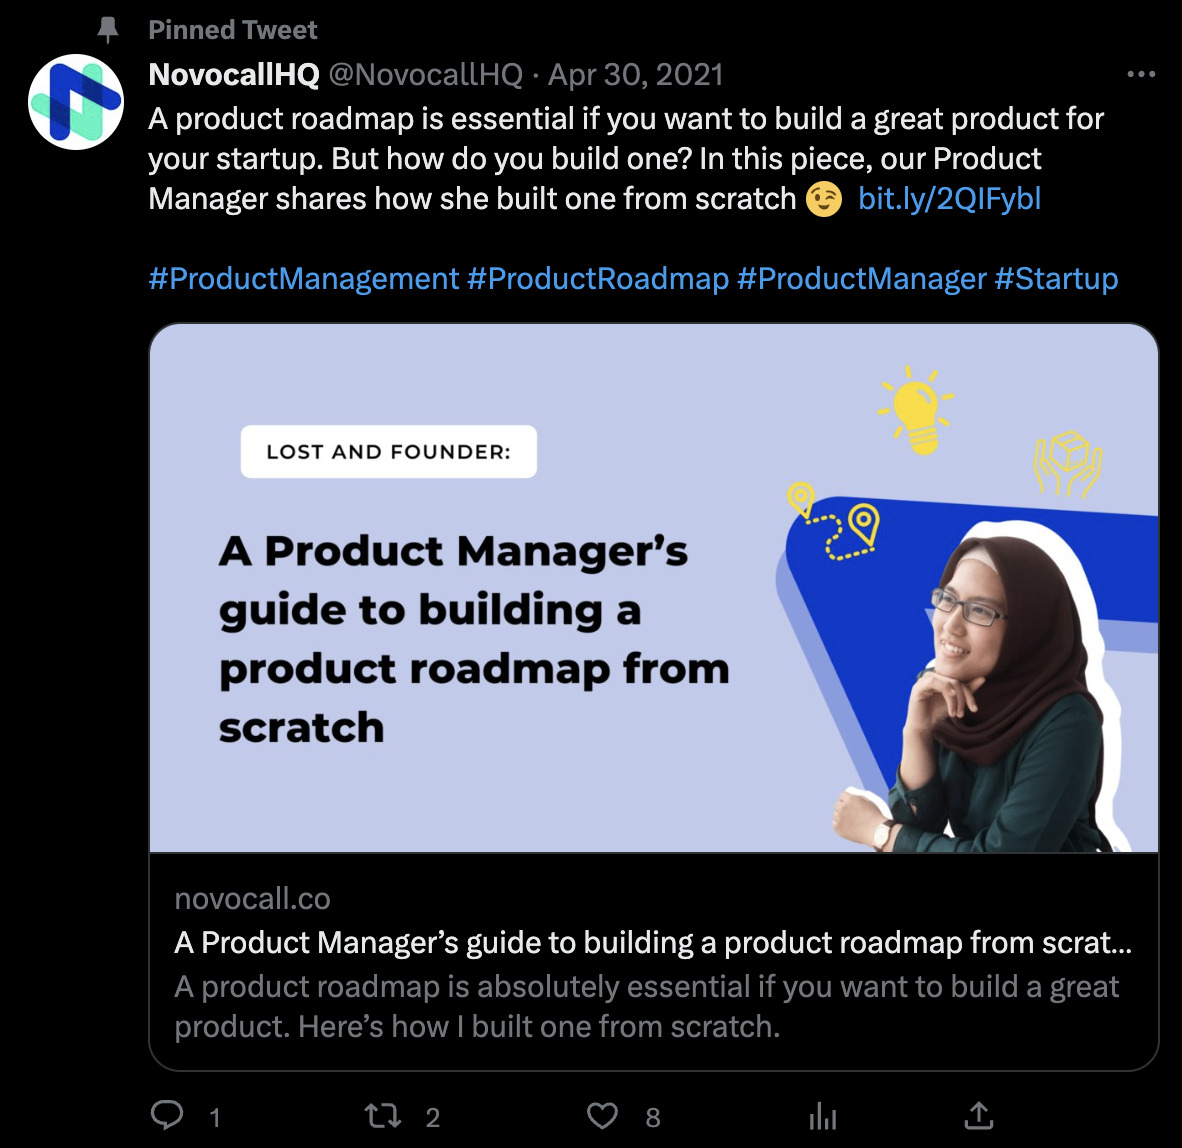 Novocall's pinned tweet promotes a blog post
